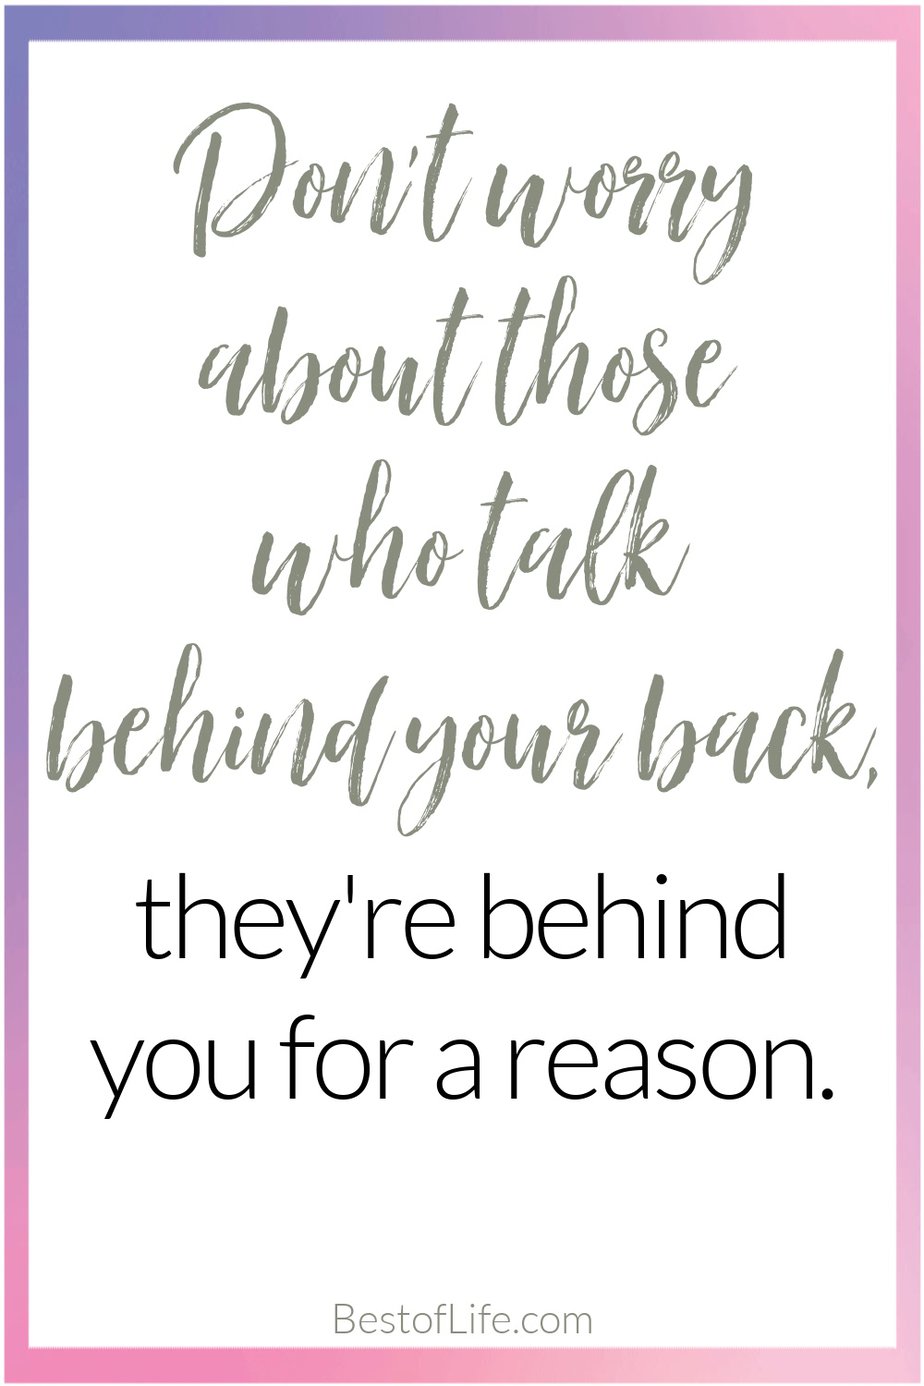 Quotes for Girls Rooms "Don't worry about those who talk behind your back, they're behind you for a reason."